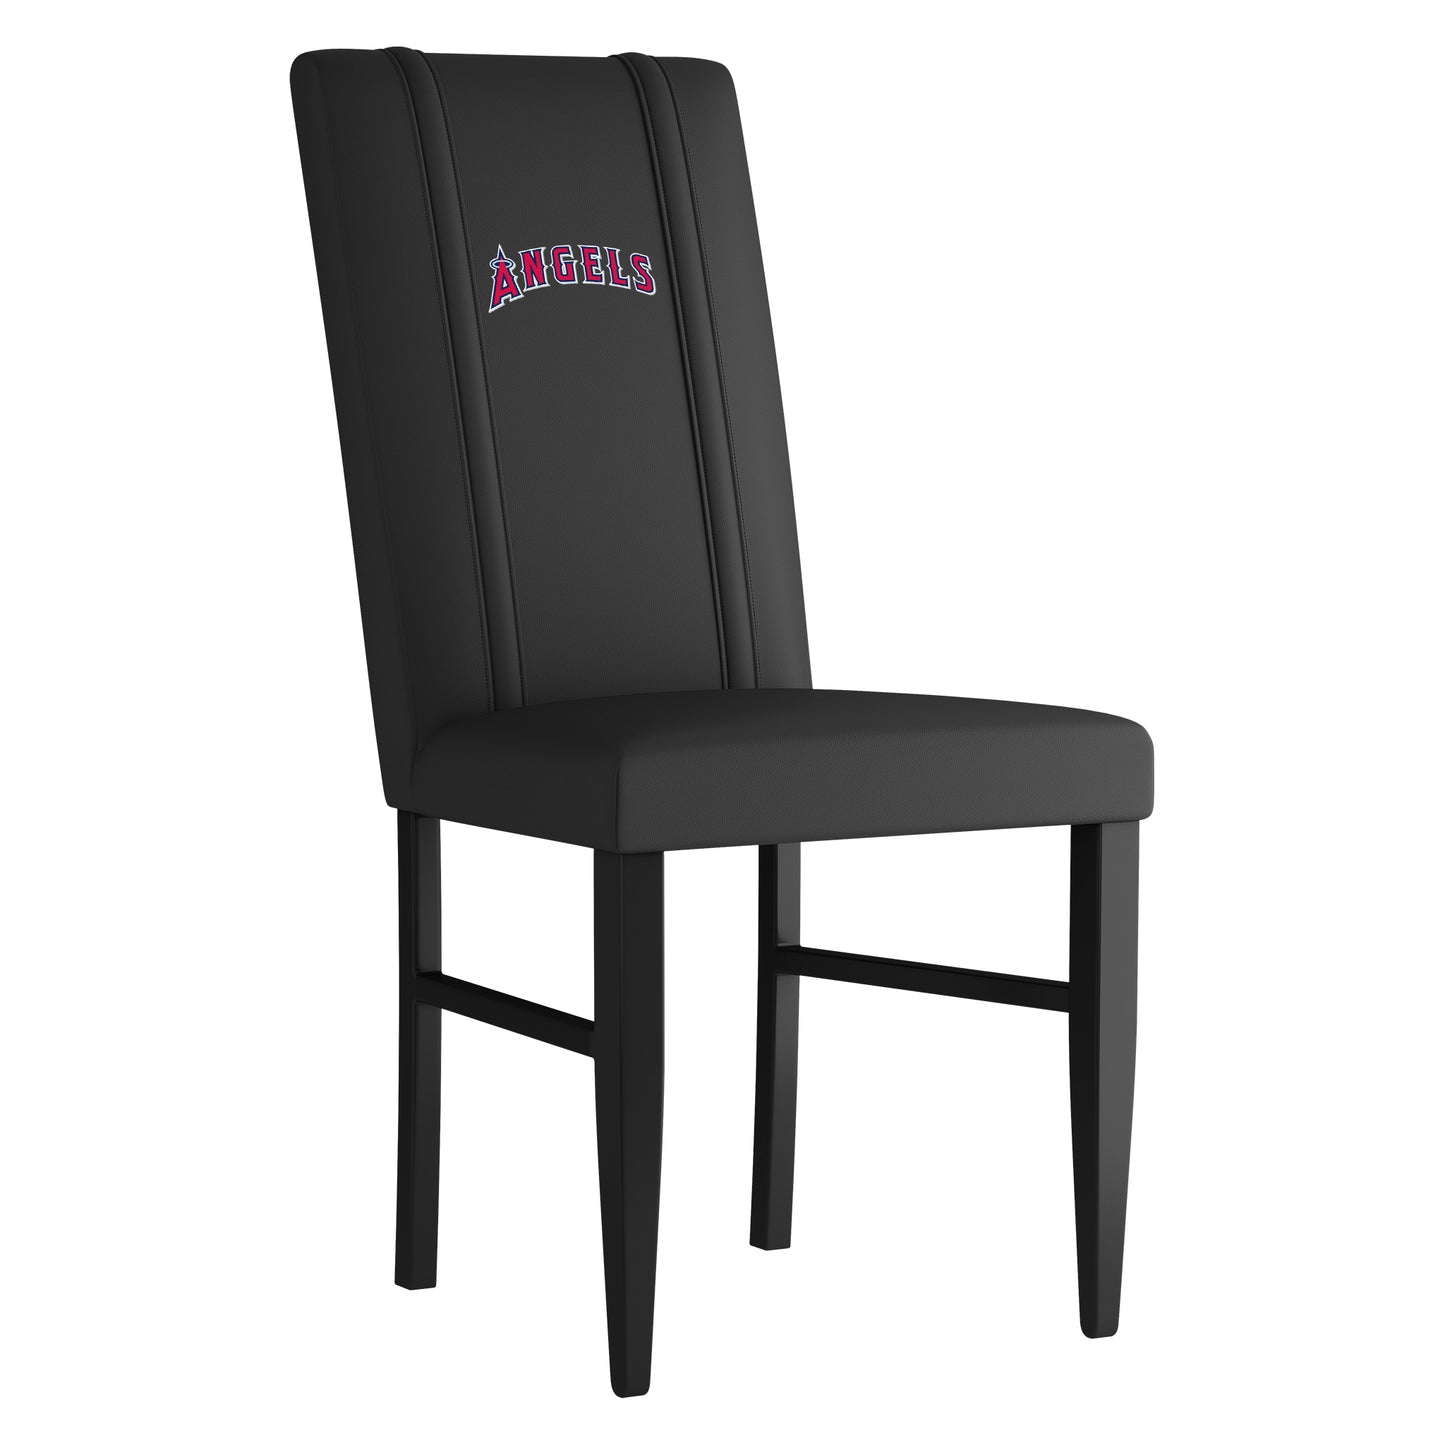 Side Chair 2000 with Los Angeles Angels Secondary Set of 2